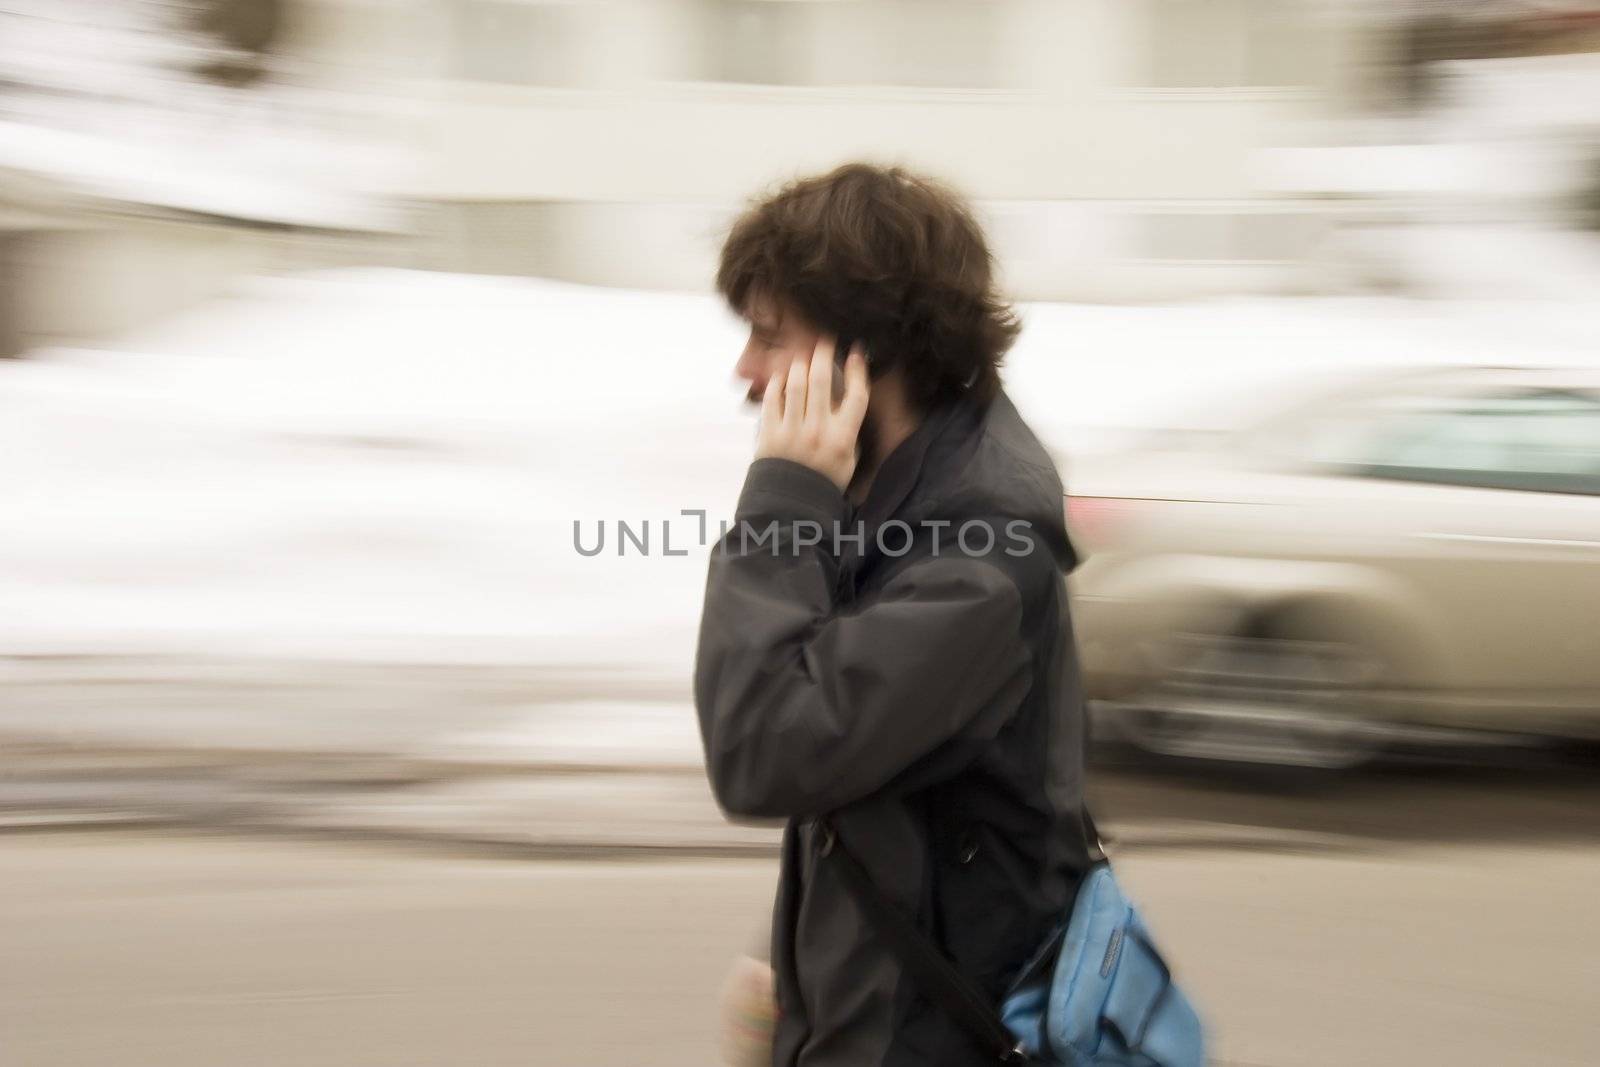 A motion blur abstract of a person walking in a hurry talking on a cell phone